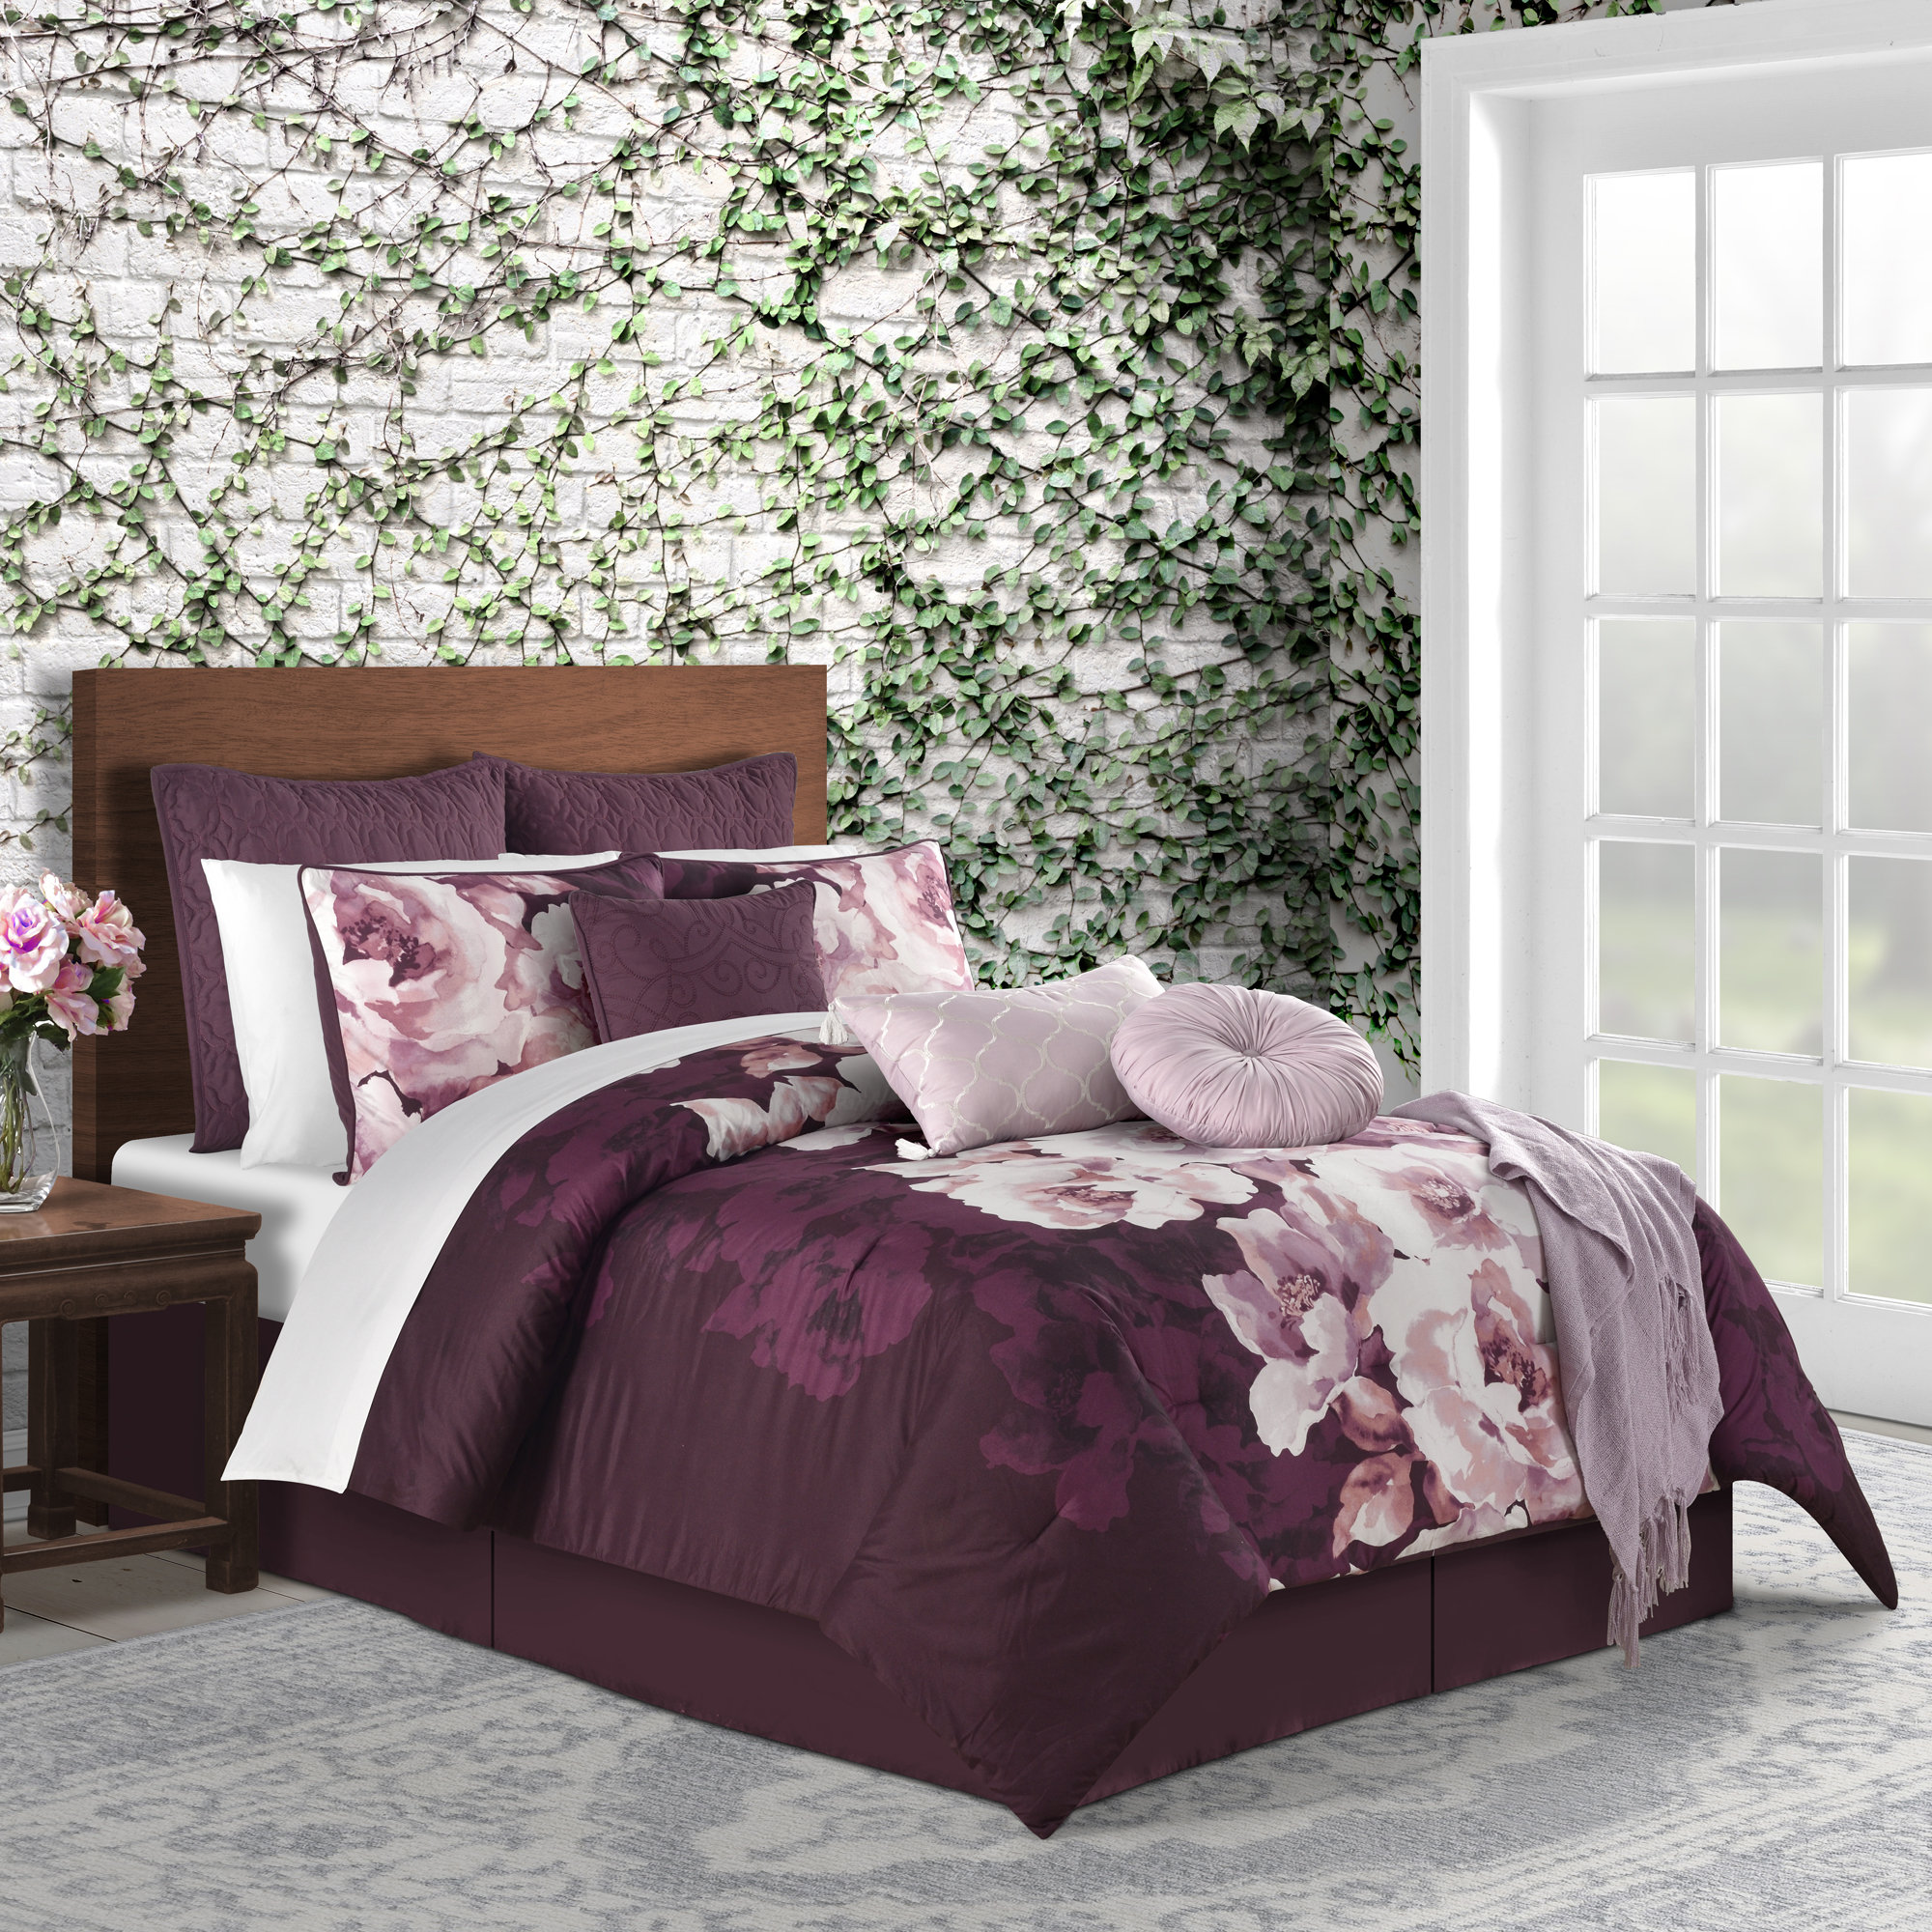 Buy Lily Peony Louis Vuitton Bedding Sets Bed sets with Twin, Full